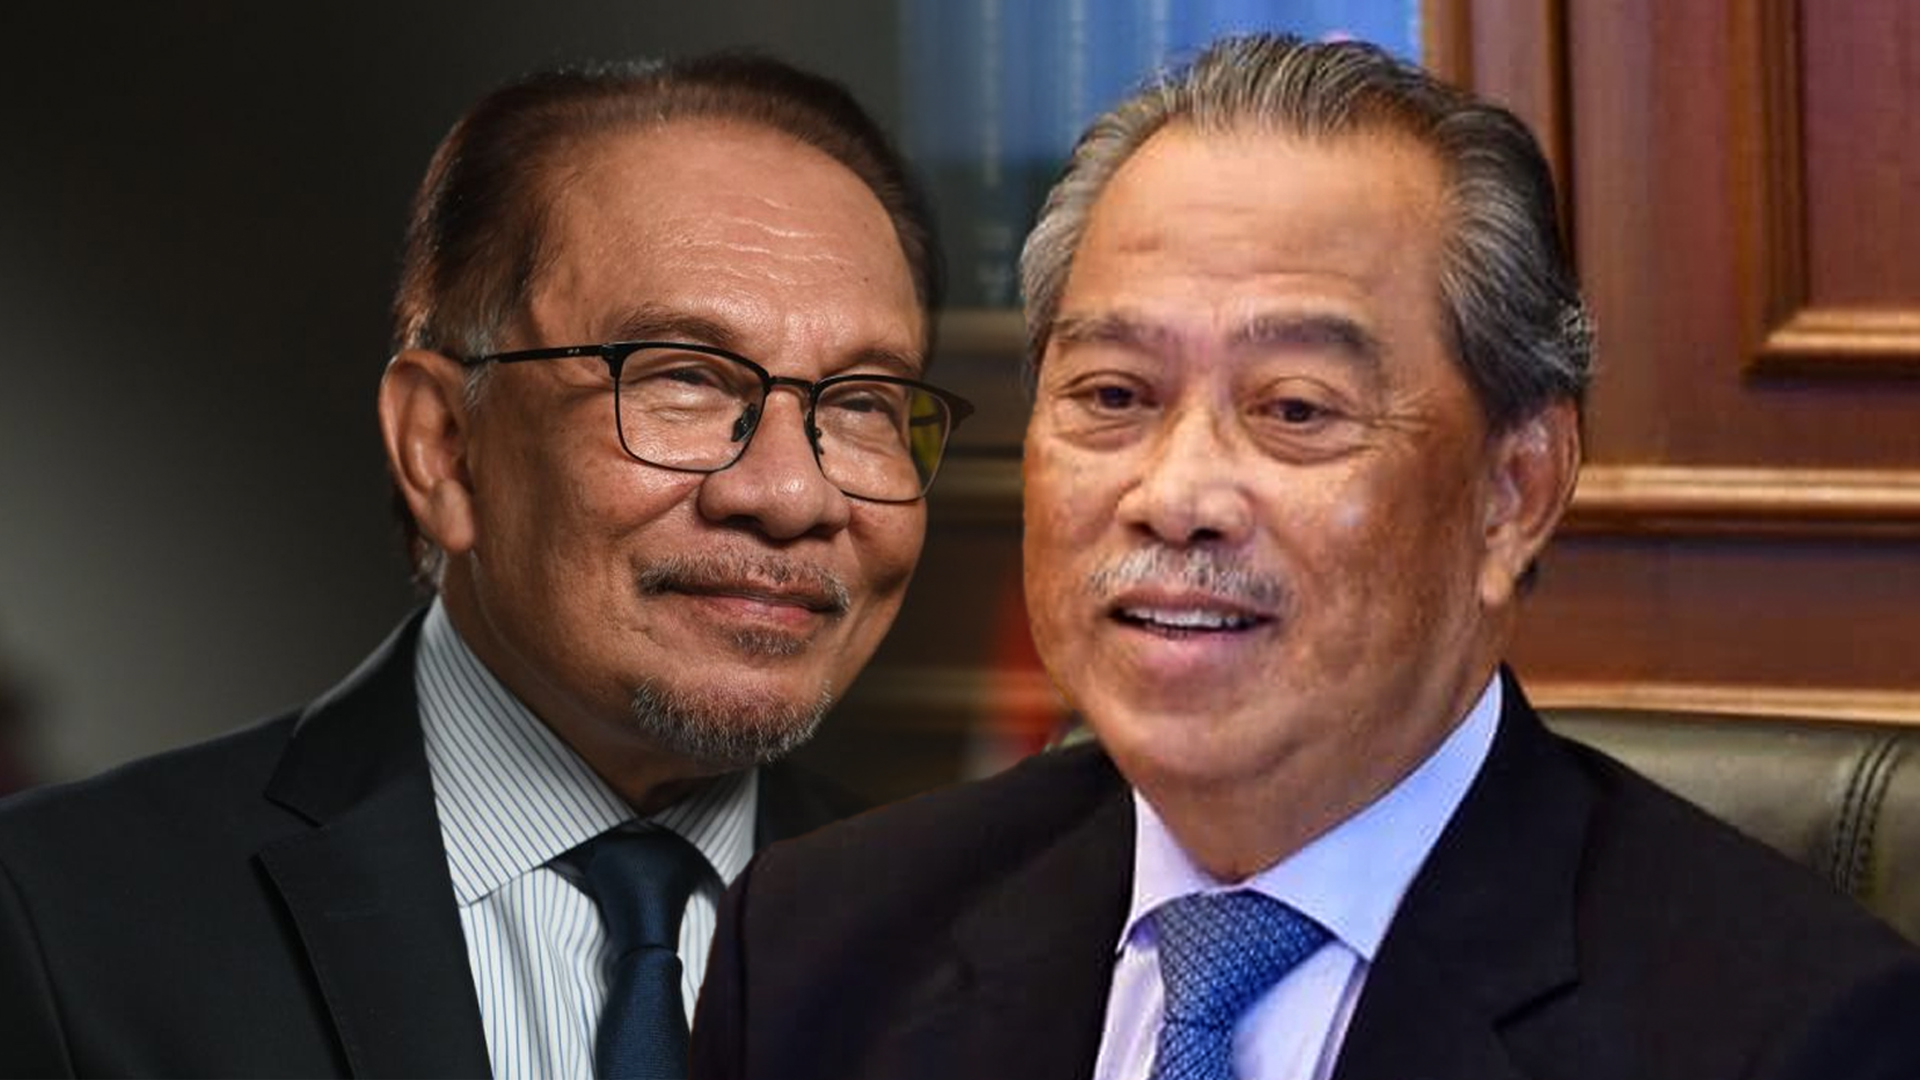 Anwar v Muhyiddin: out-of-court settlement reached for ‘rakyat’s wellbeing’